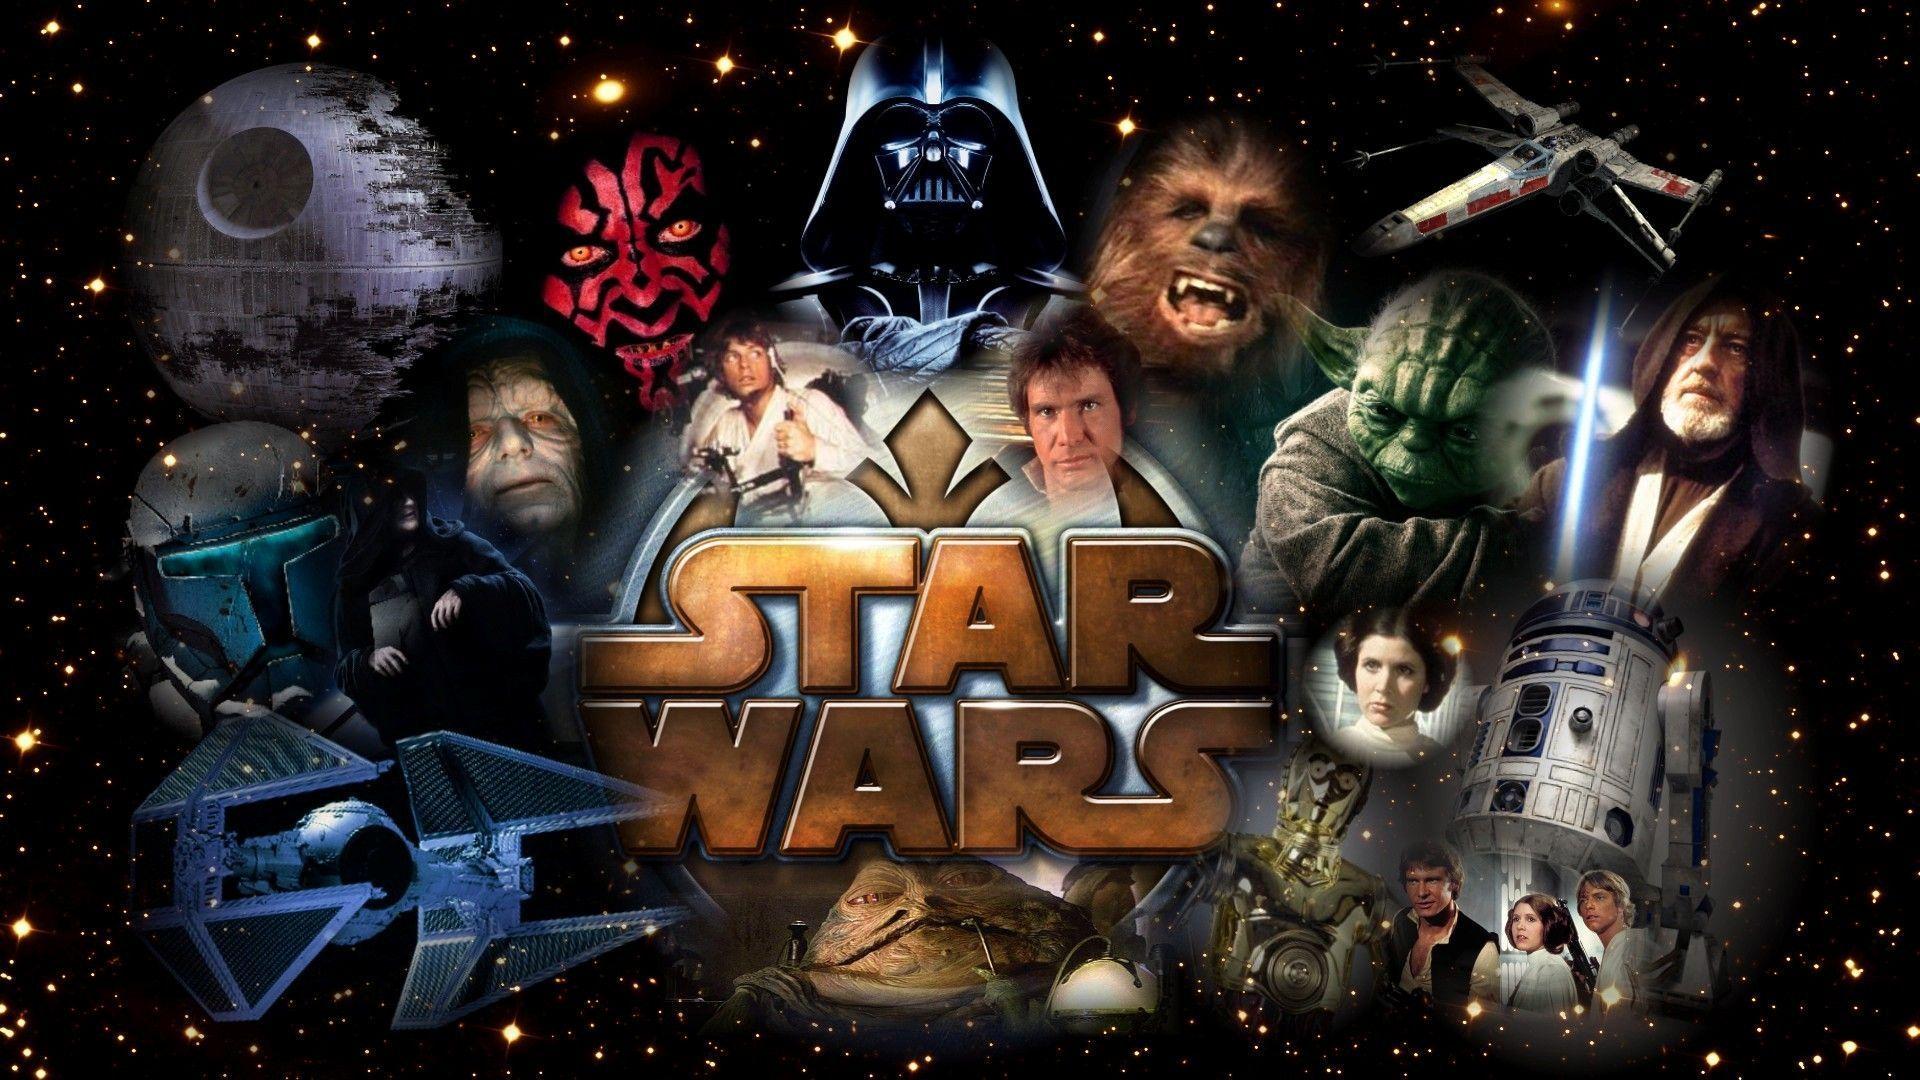 Star Wars Theme Song. Movie Theme Songs & TV Soundtracks